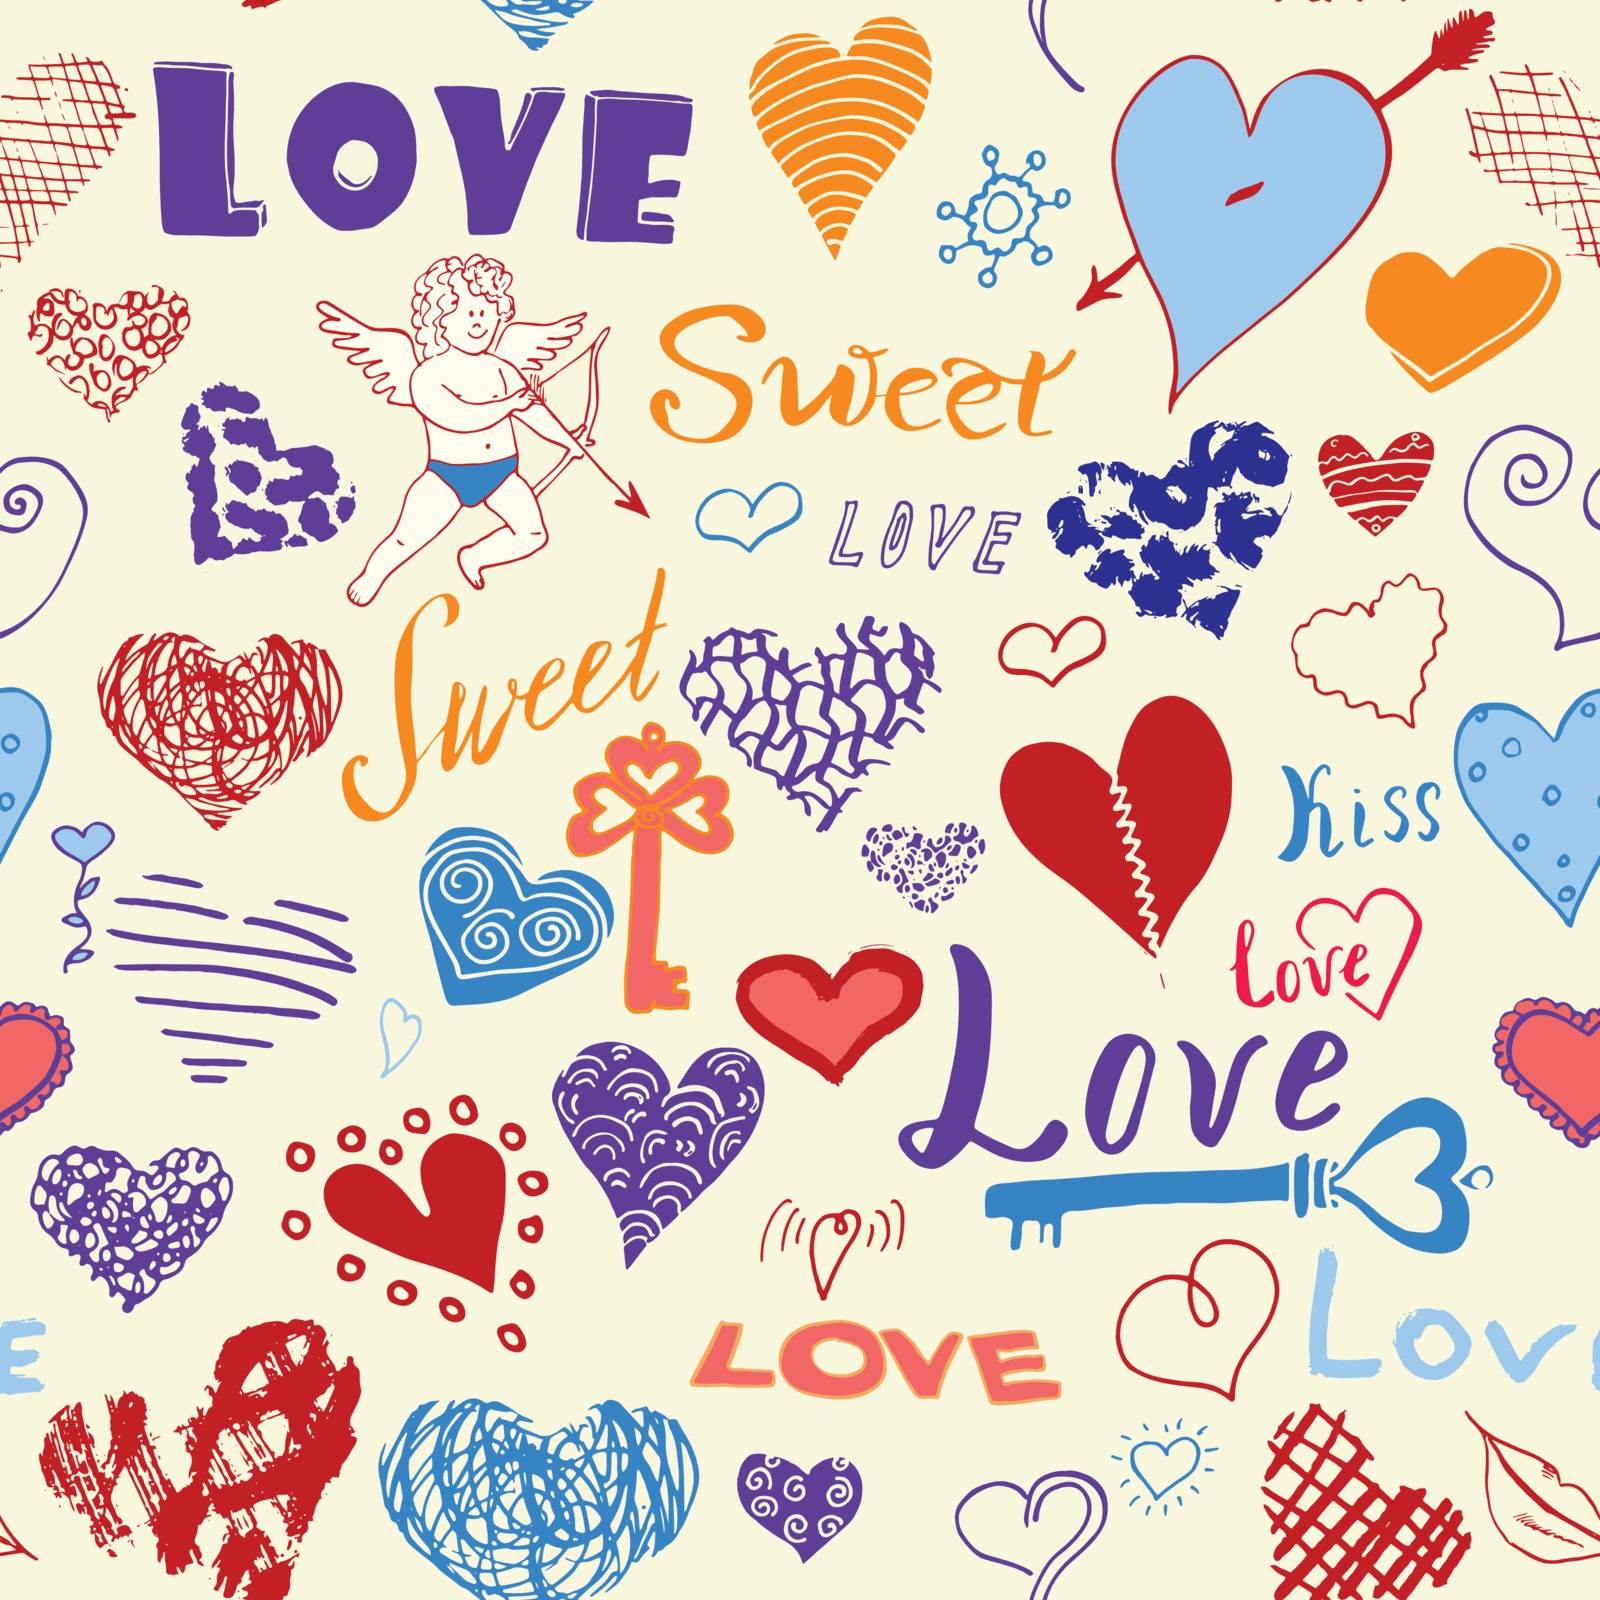 Valentines day hand drawn elements seamless pattern. Sketched doodle elements hearts symbols and lettering for wedding invitations, scrapbook, cards, posters. gift wraps